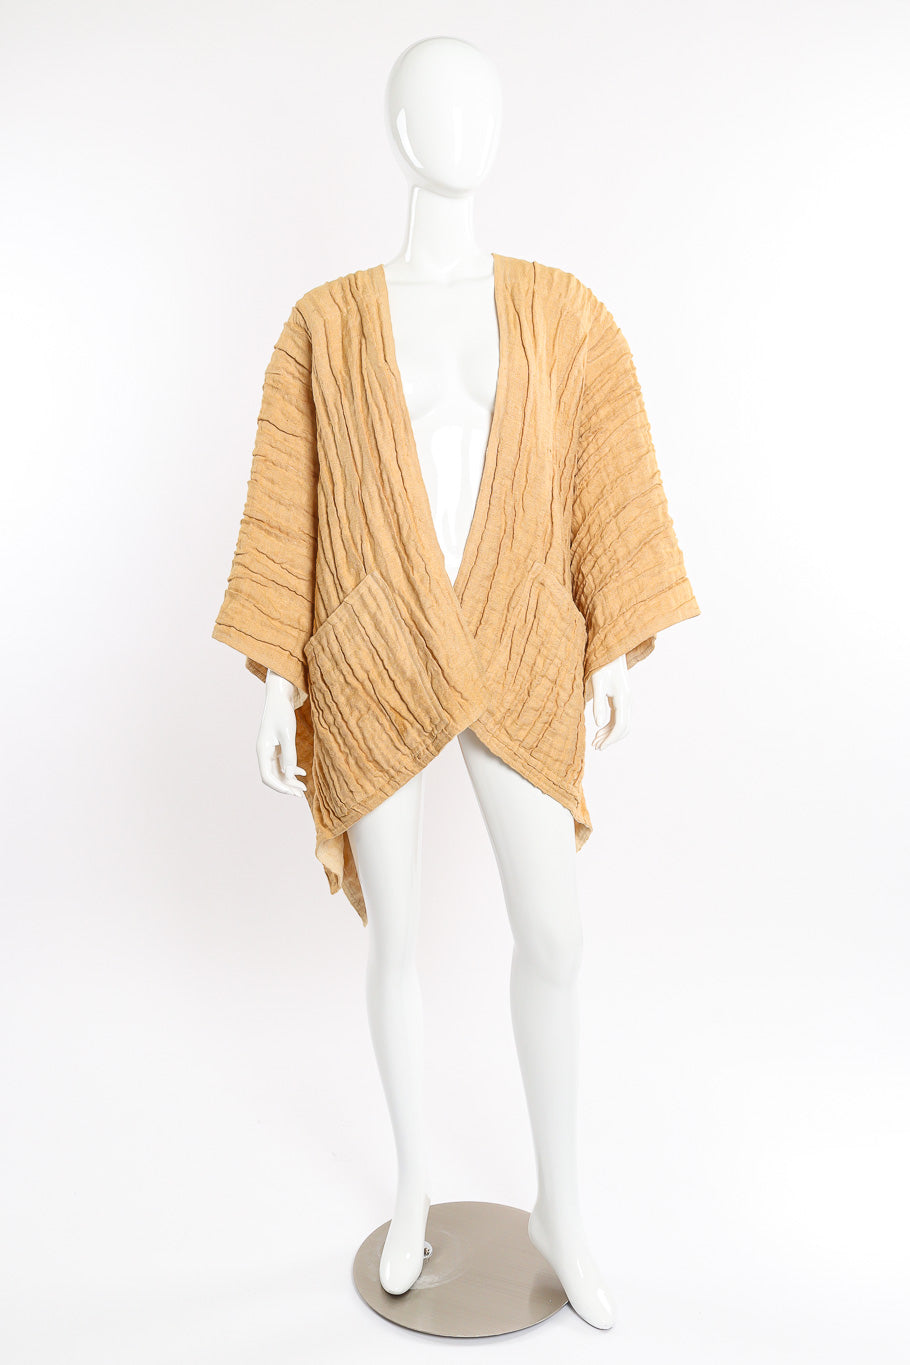 Issey Miyake Flax Linen Pleated Kimono front view on mannequin @Recessla